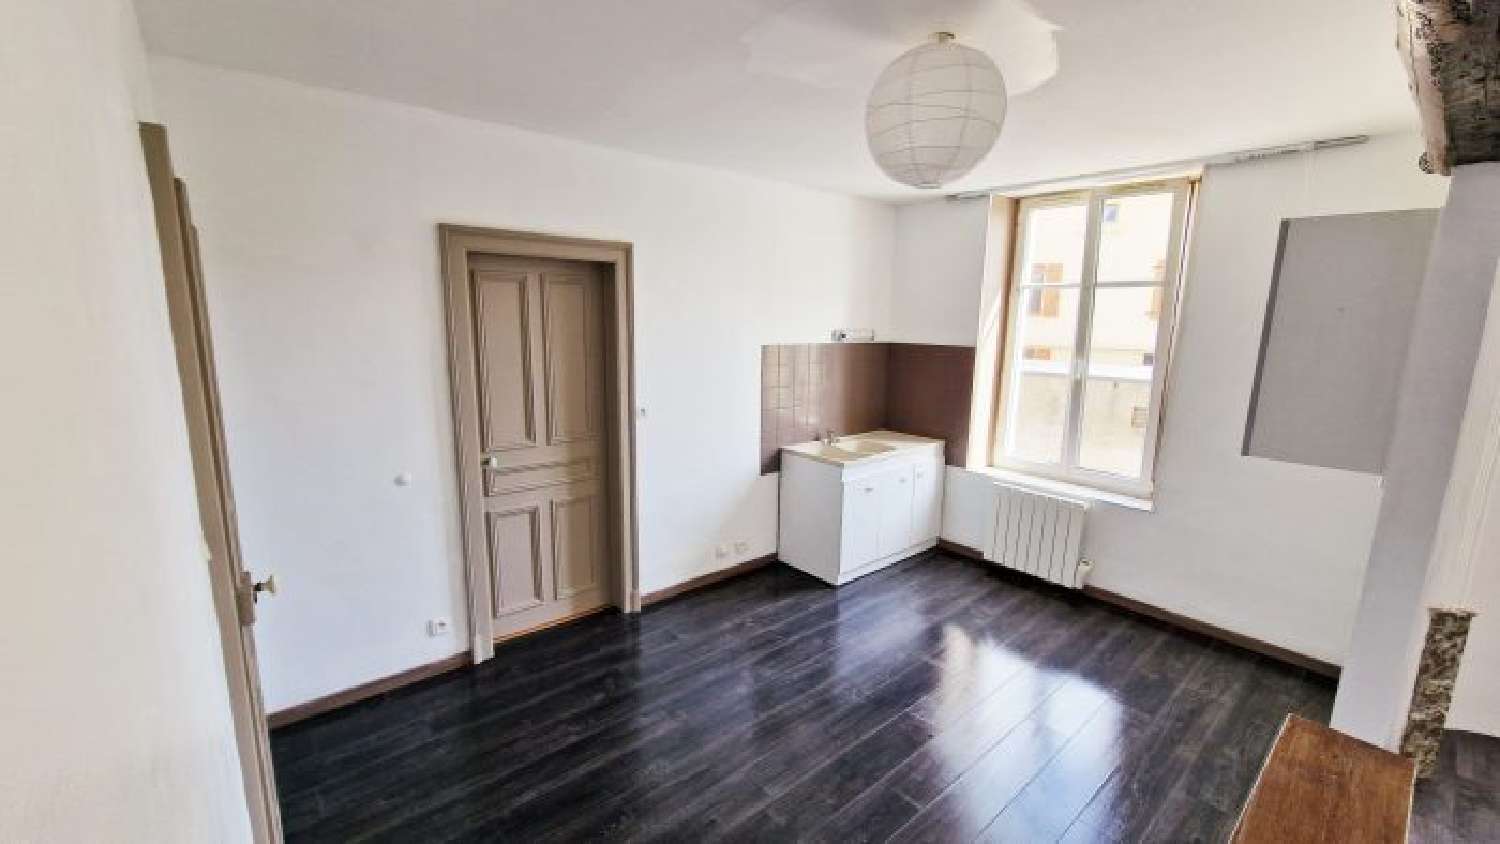  kaufen Wohnung/ Apartment Pagny-sur-Moselle Meurthe-et-Moselle 5